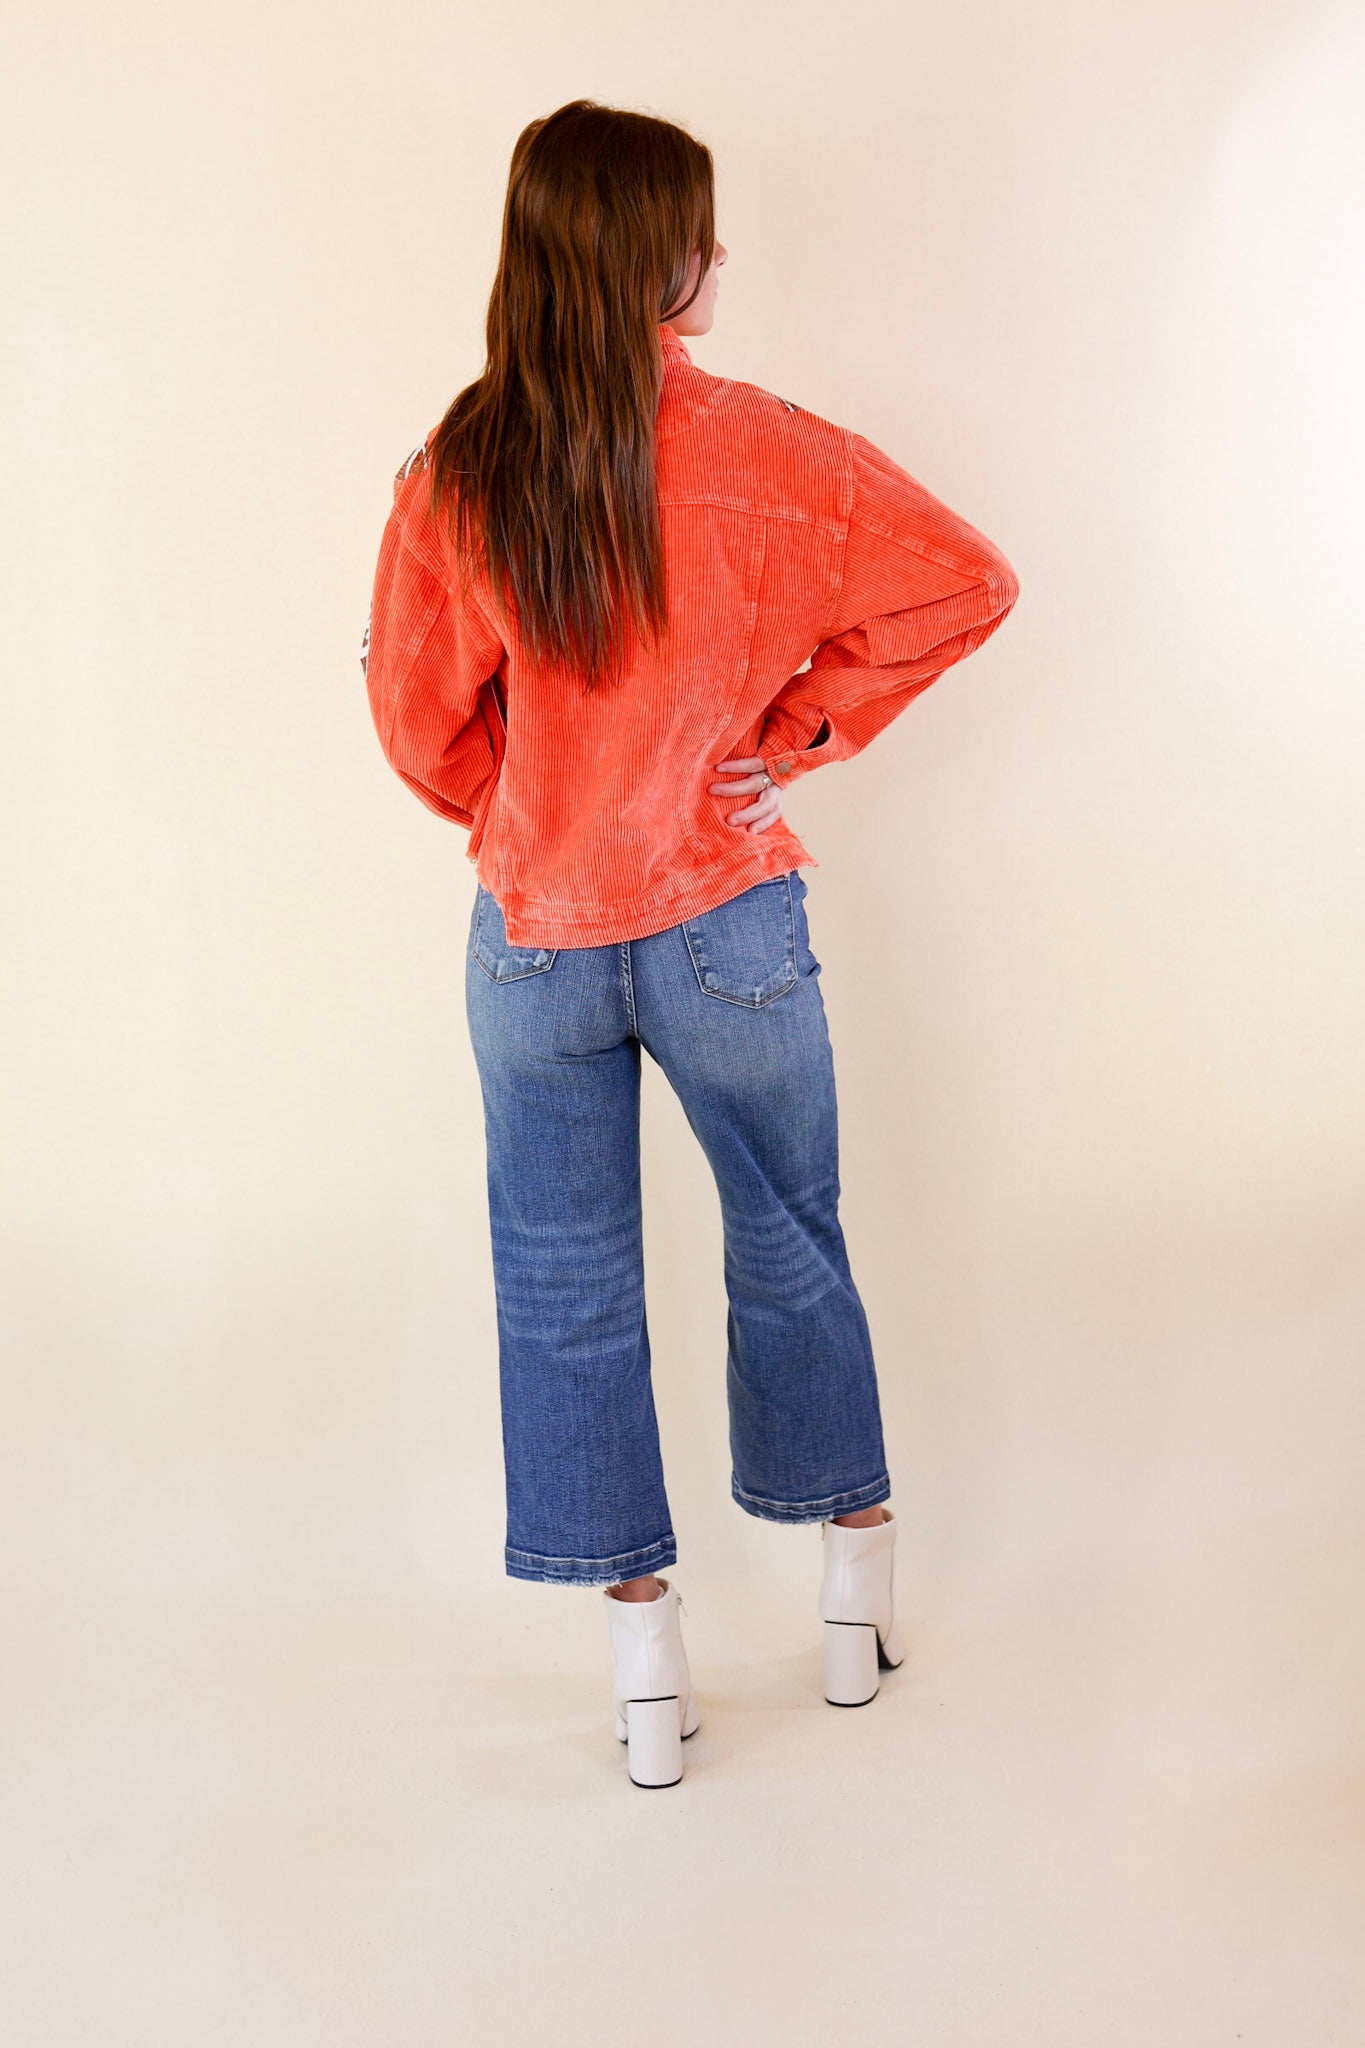 Gameday Ready Corduroy Shacket with Sequin Football Patches in Orange - Giddy Up Glamour Boutique